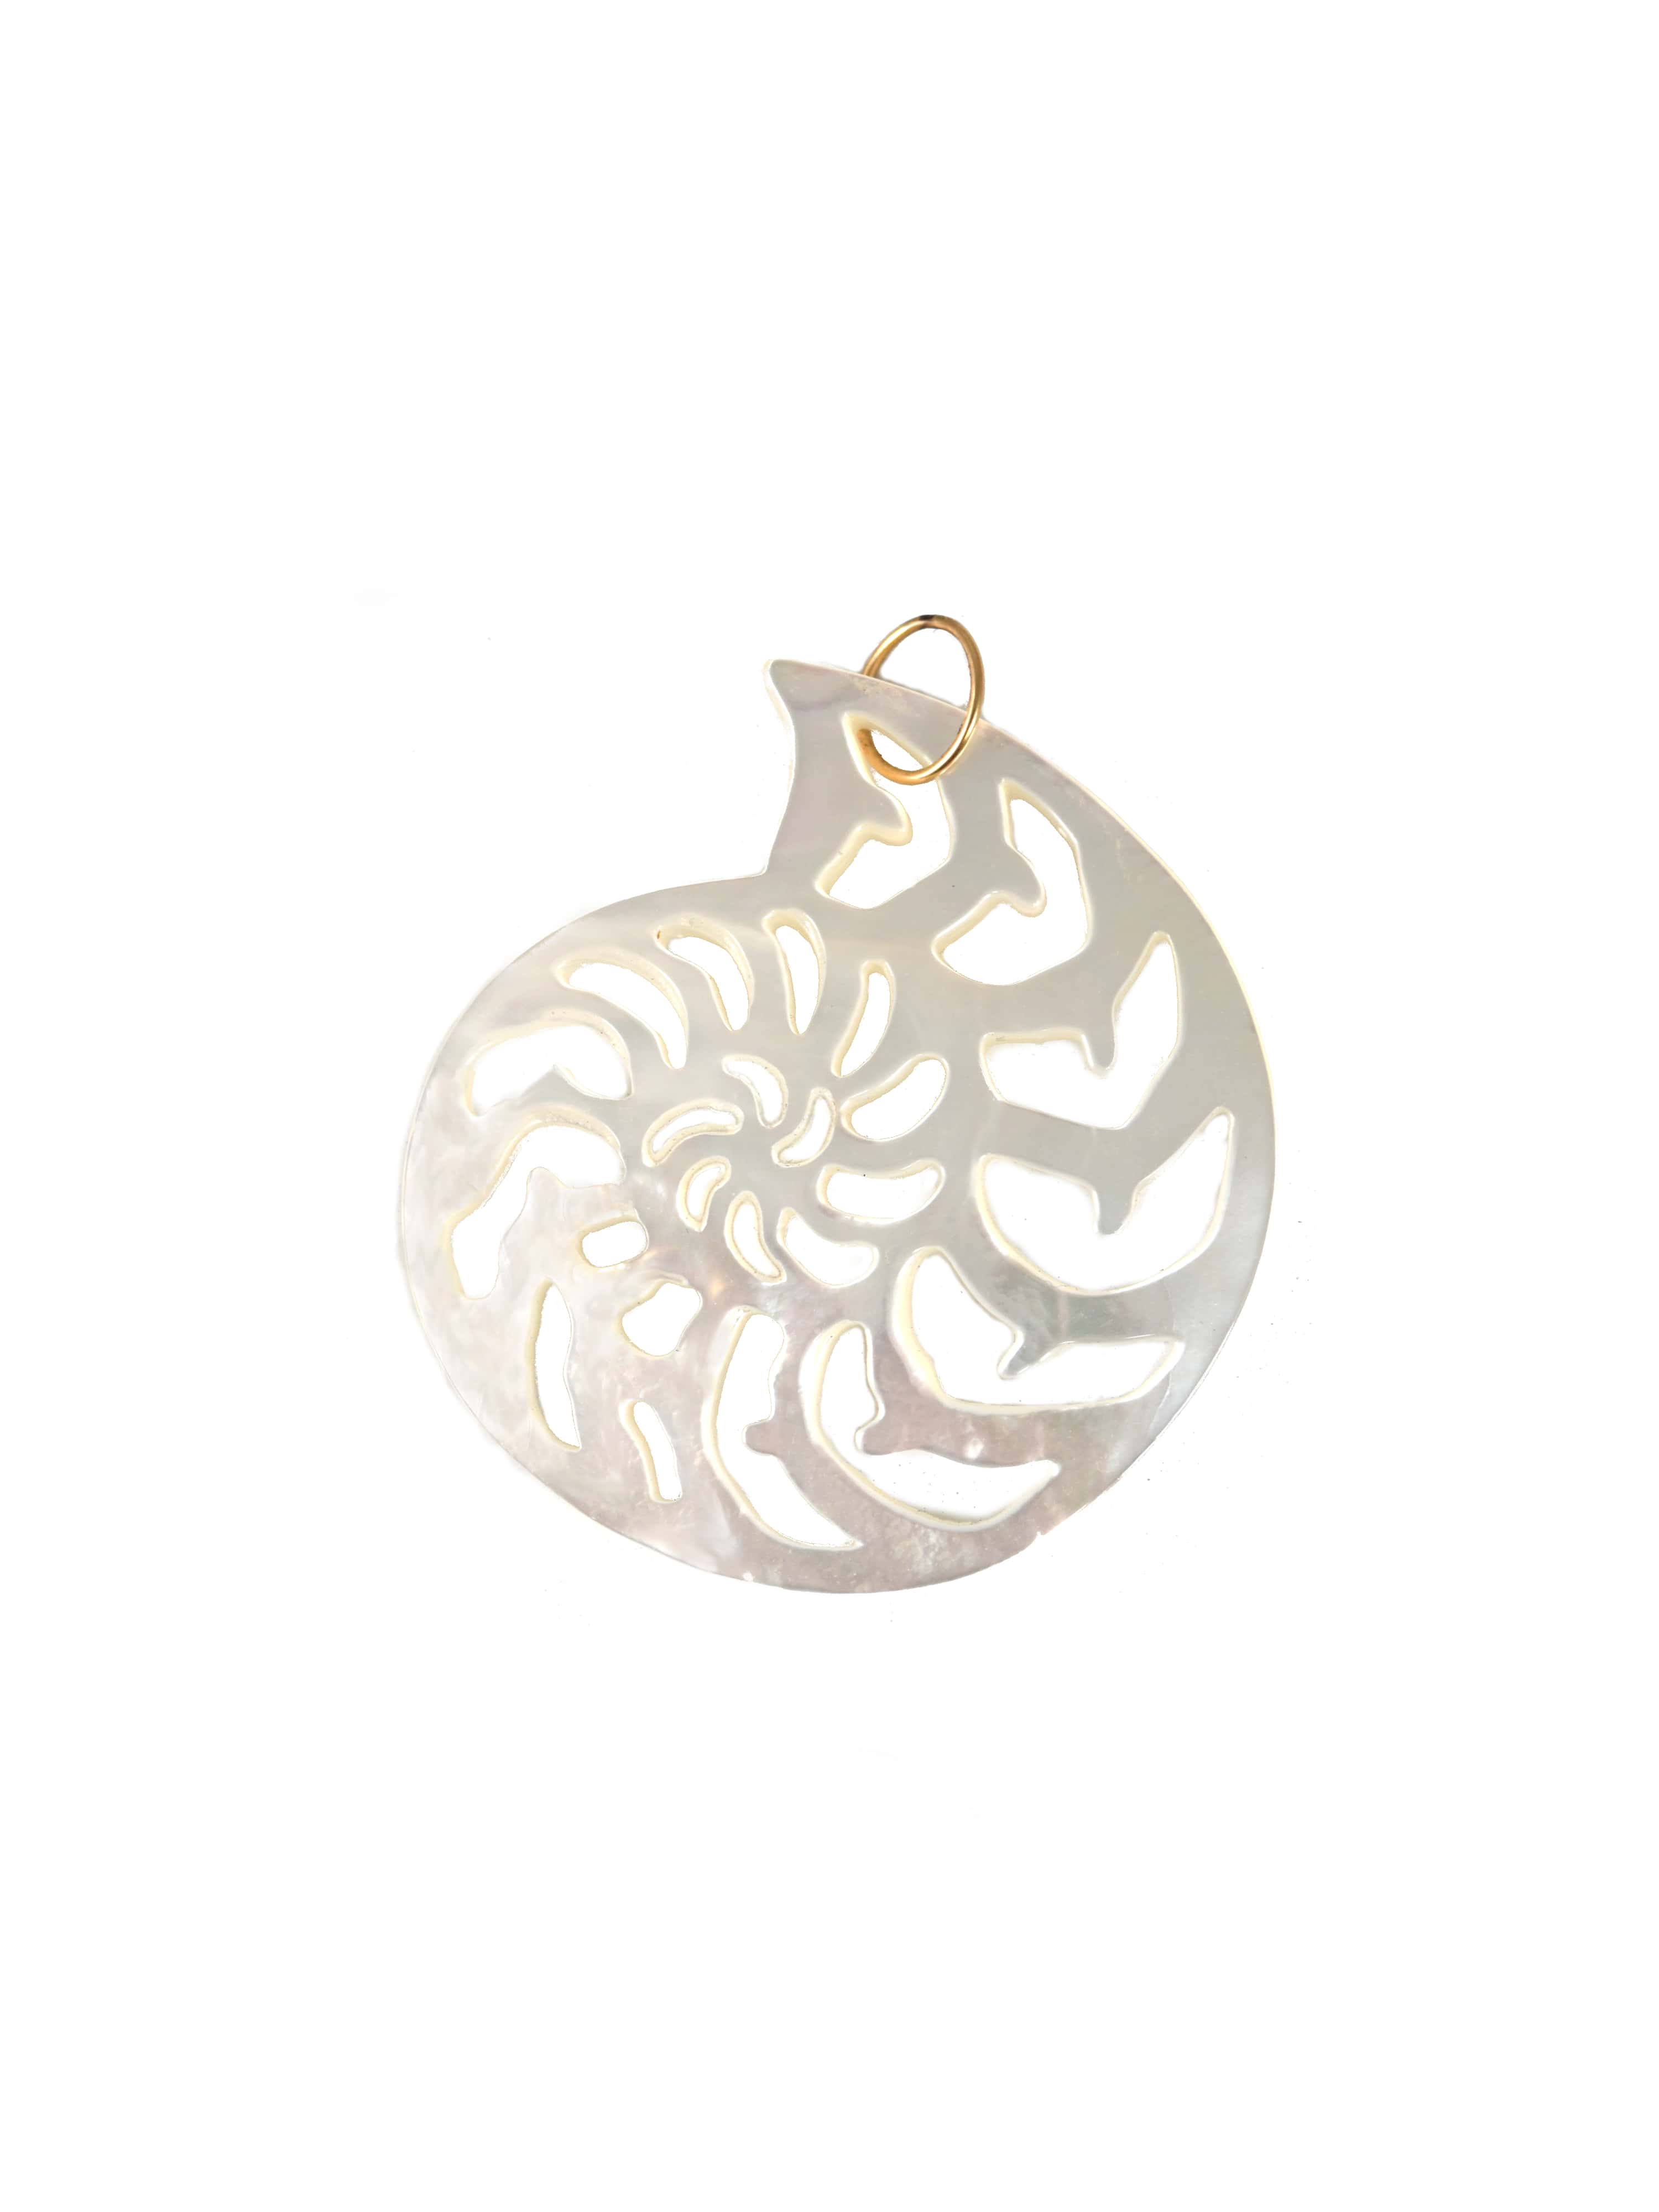 Nautilus Mother of Pearl Charm